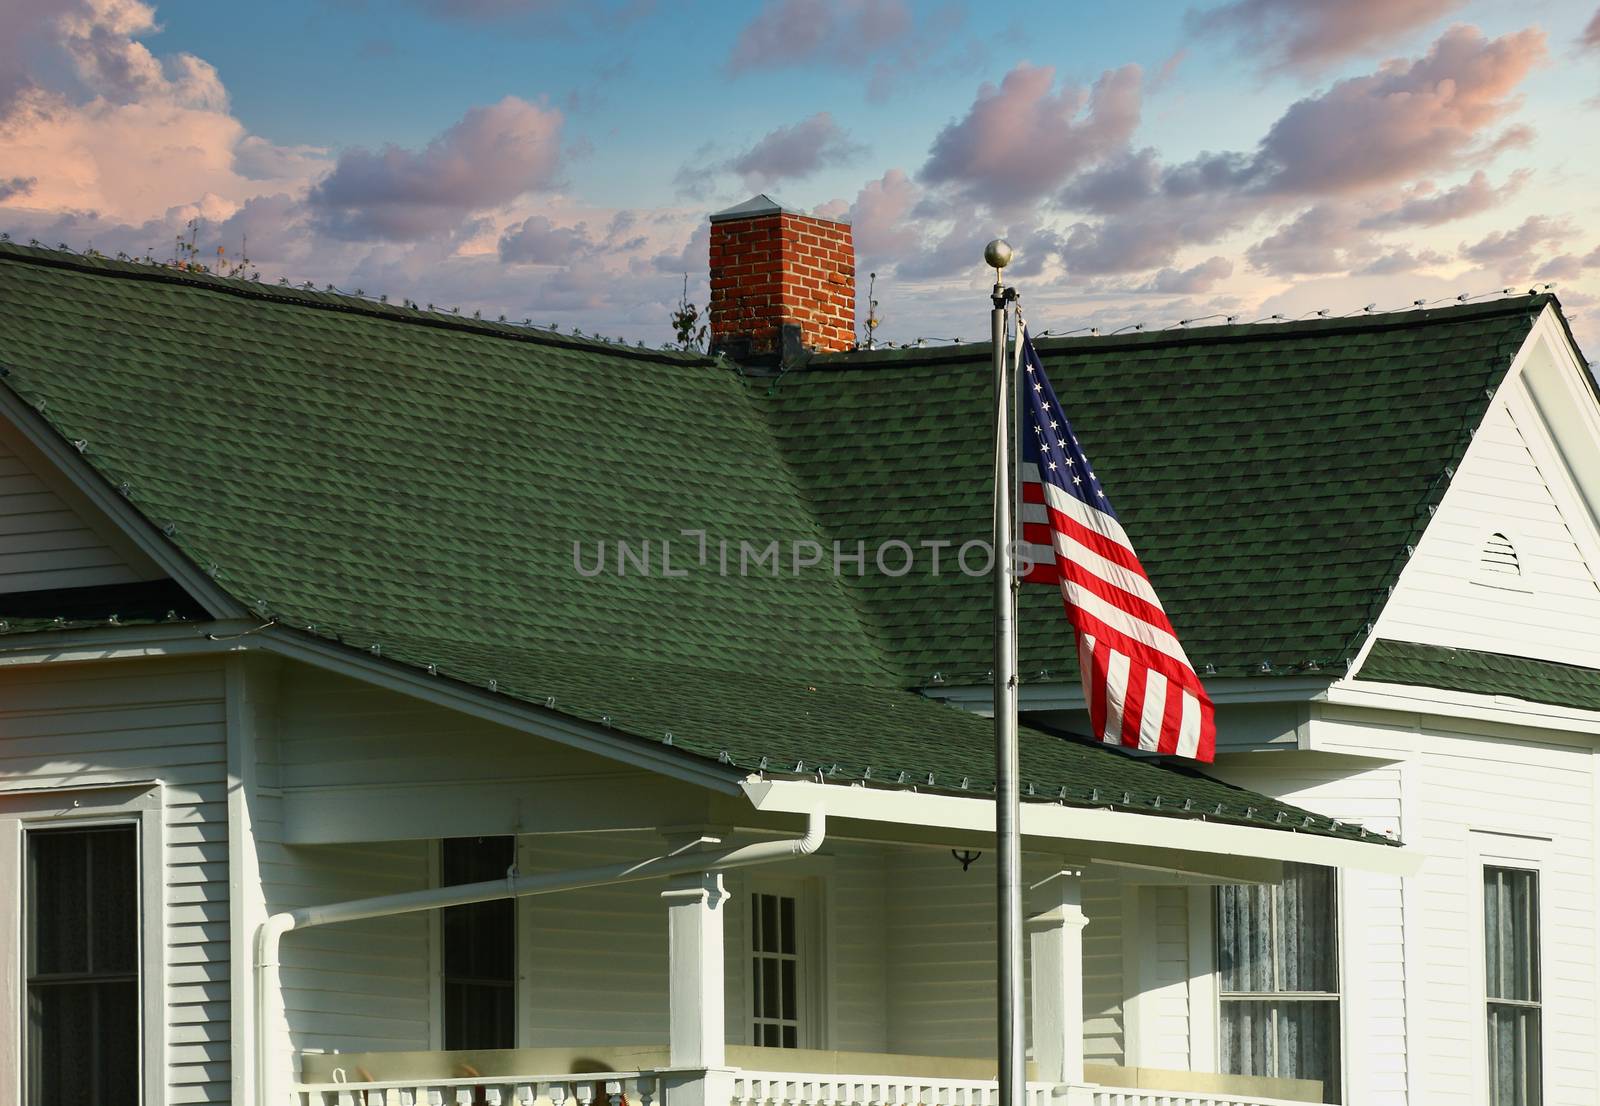 An old house with green shingled roof and an American flag